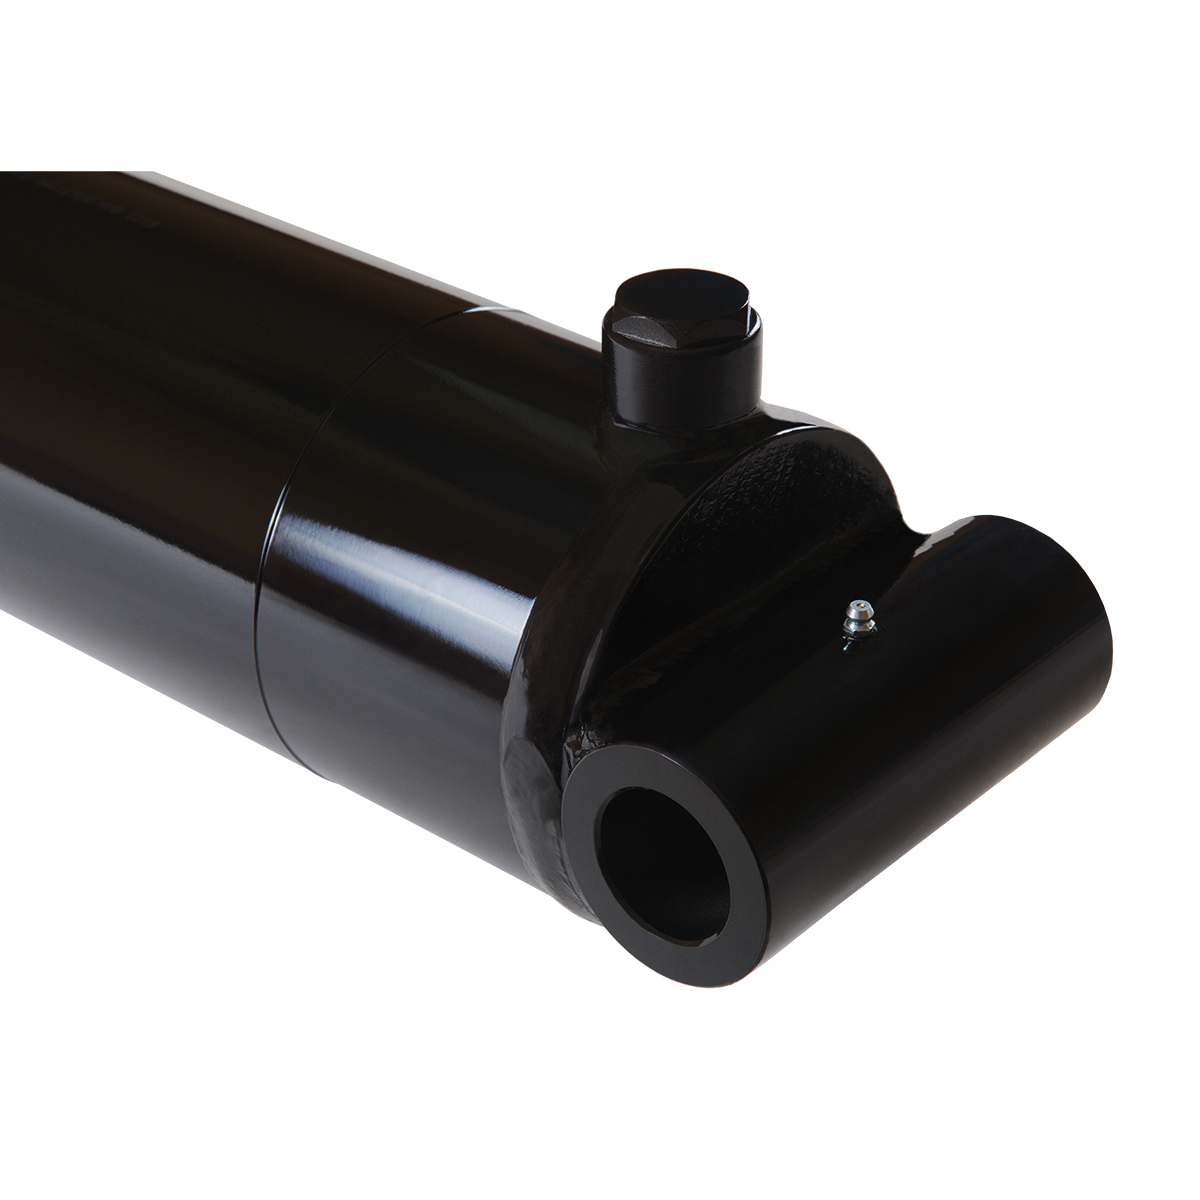 5 bore x 24 stroke hydraulic cylinder, welded cross tube double acting cylinder | Magister Hydraulics